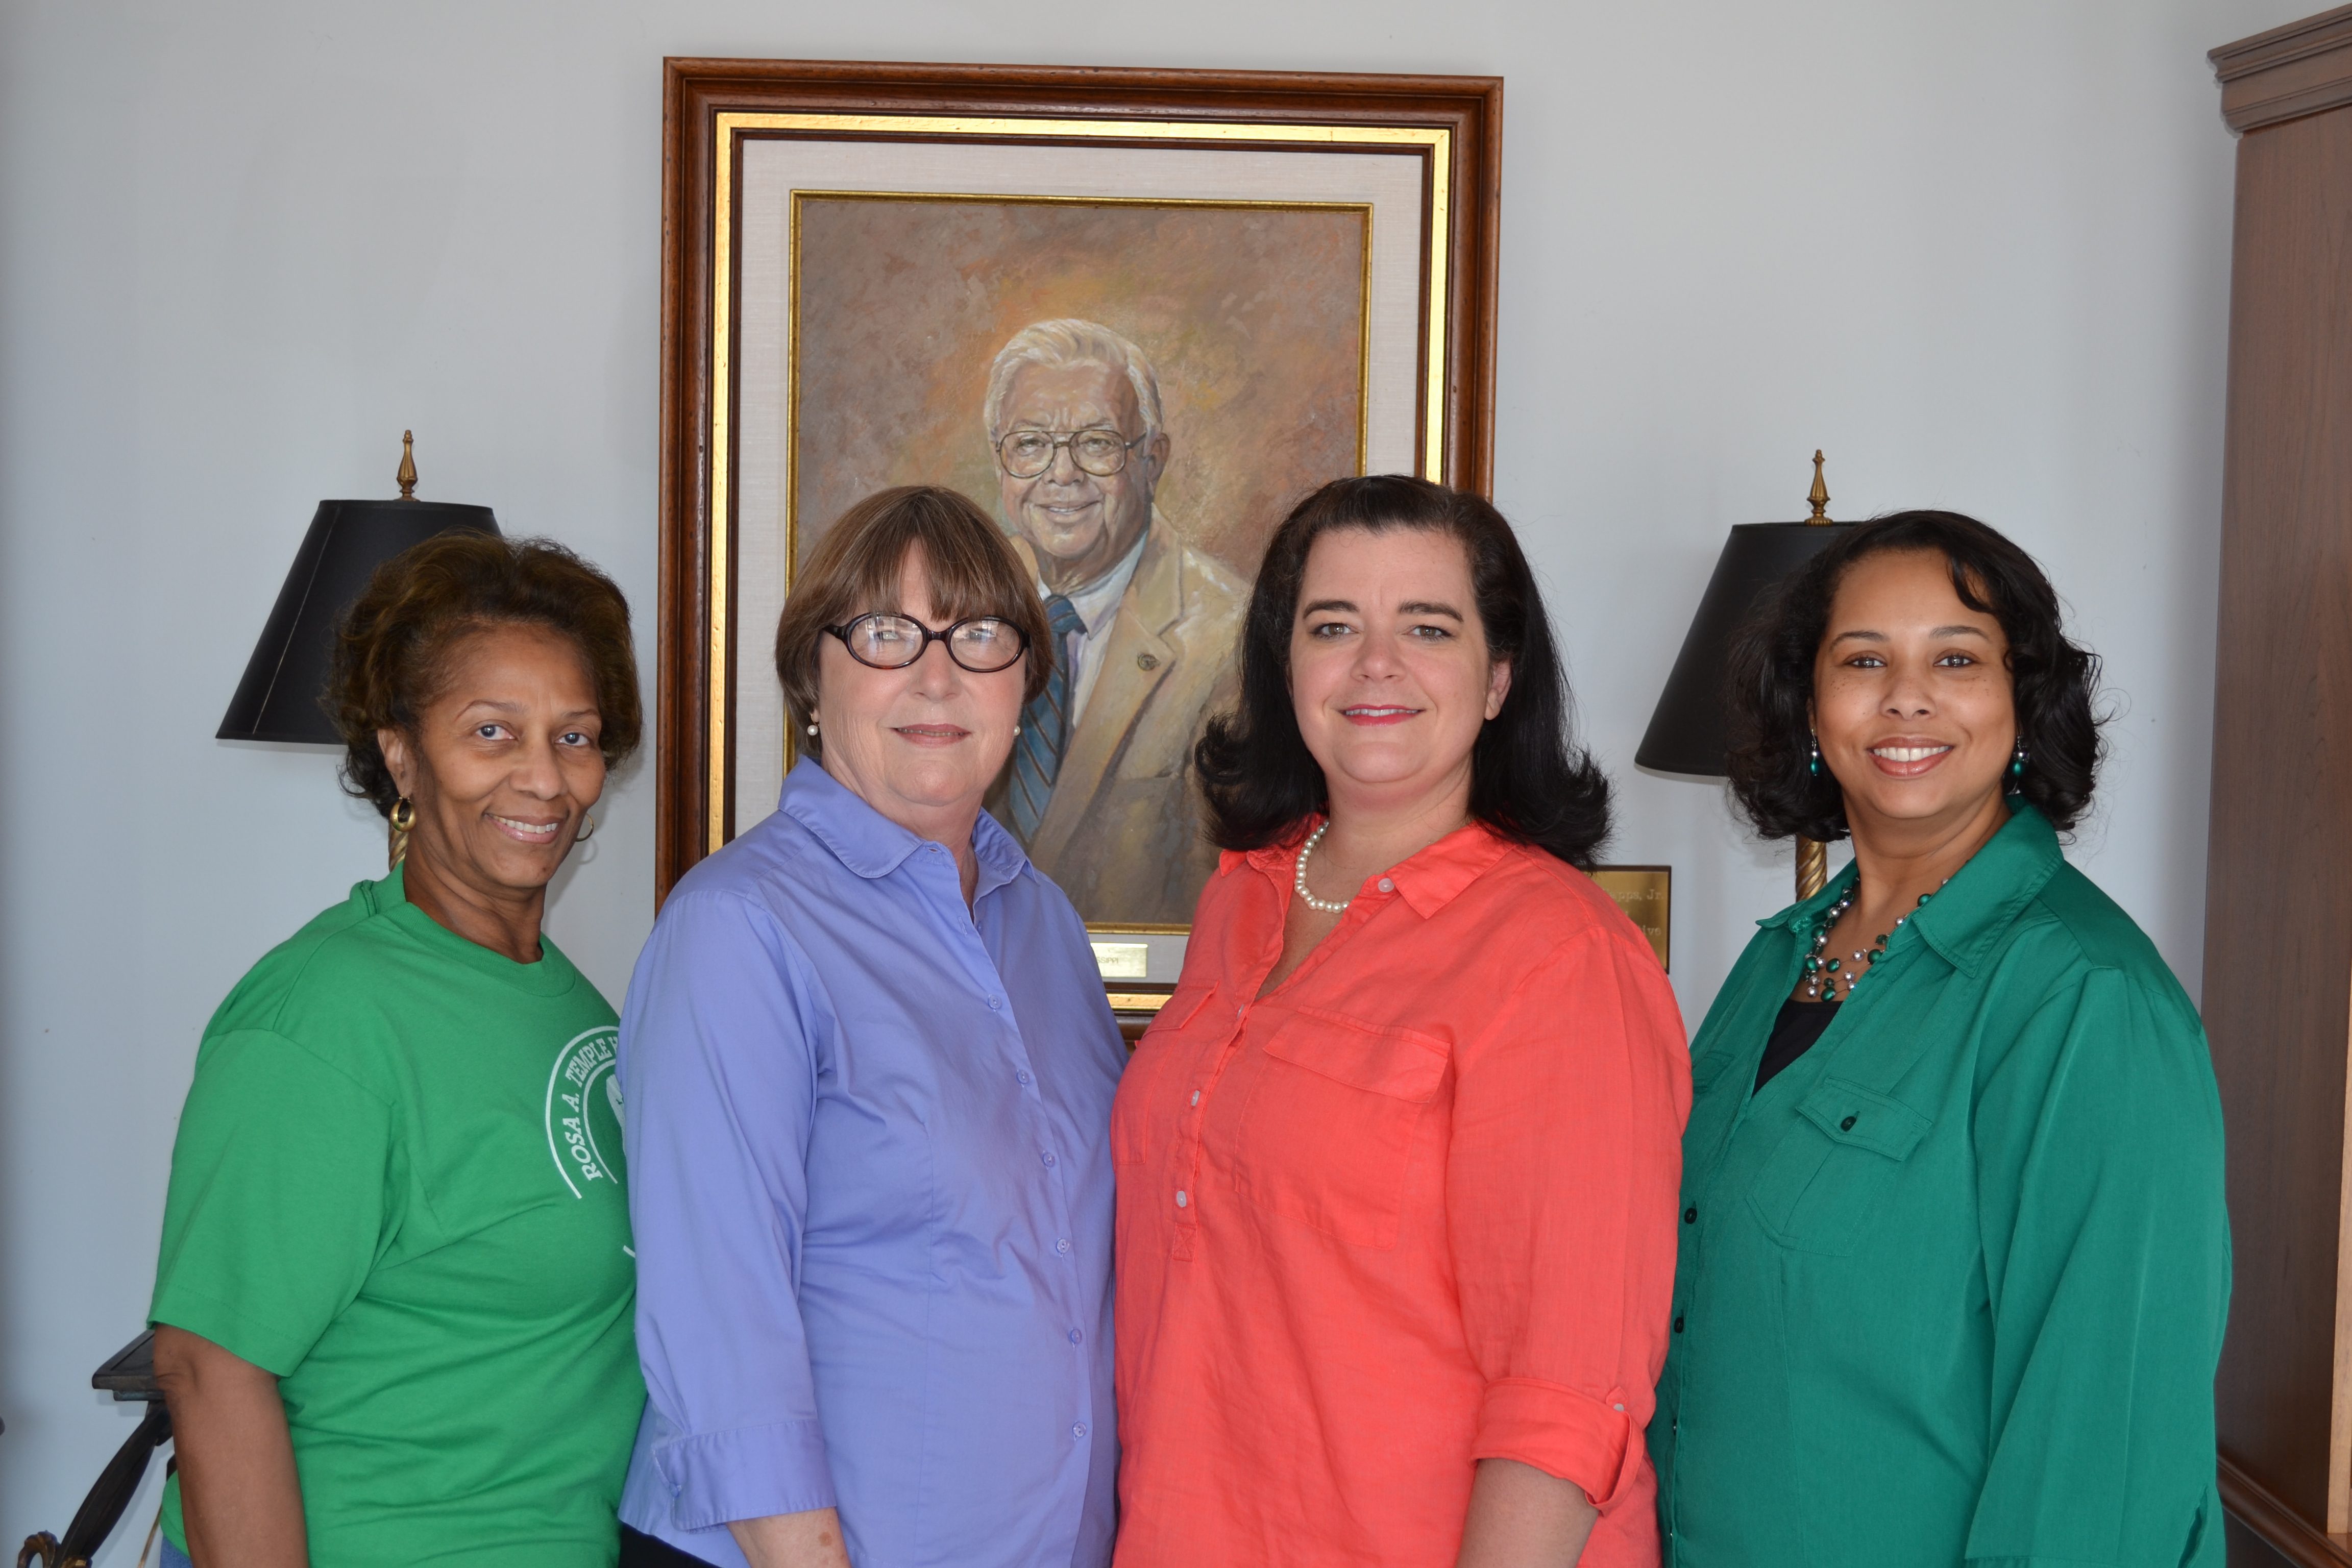 PHOTO:   The Lucy Somerville Howorth Outstanding Woman of the Delta Award committee members are Georgene Clark, Ann Ashmore, Emily Jones, and Joi Phillips. Not pictured are Myrtis Tabb and Lisa Miller. 